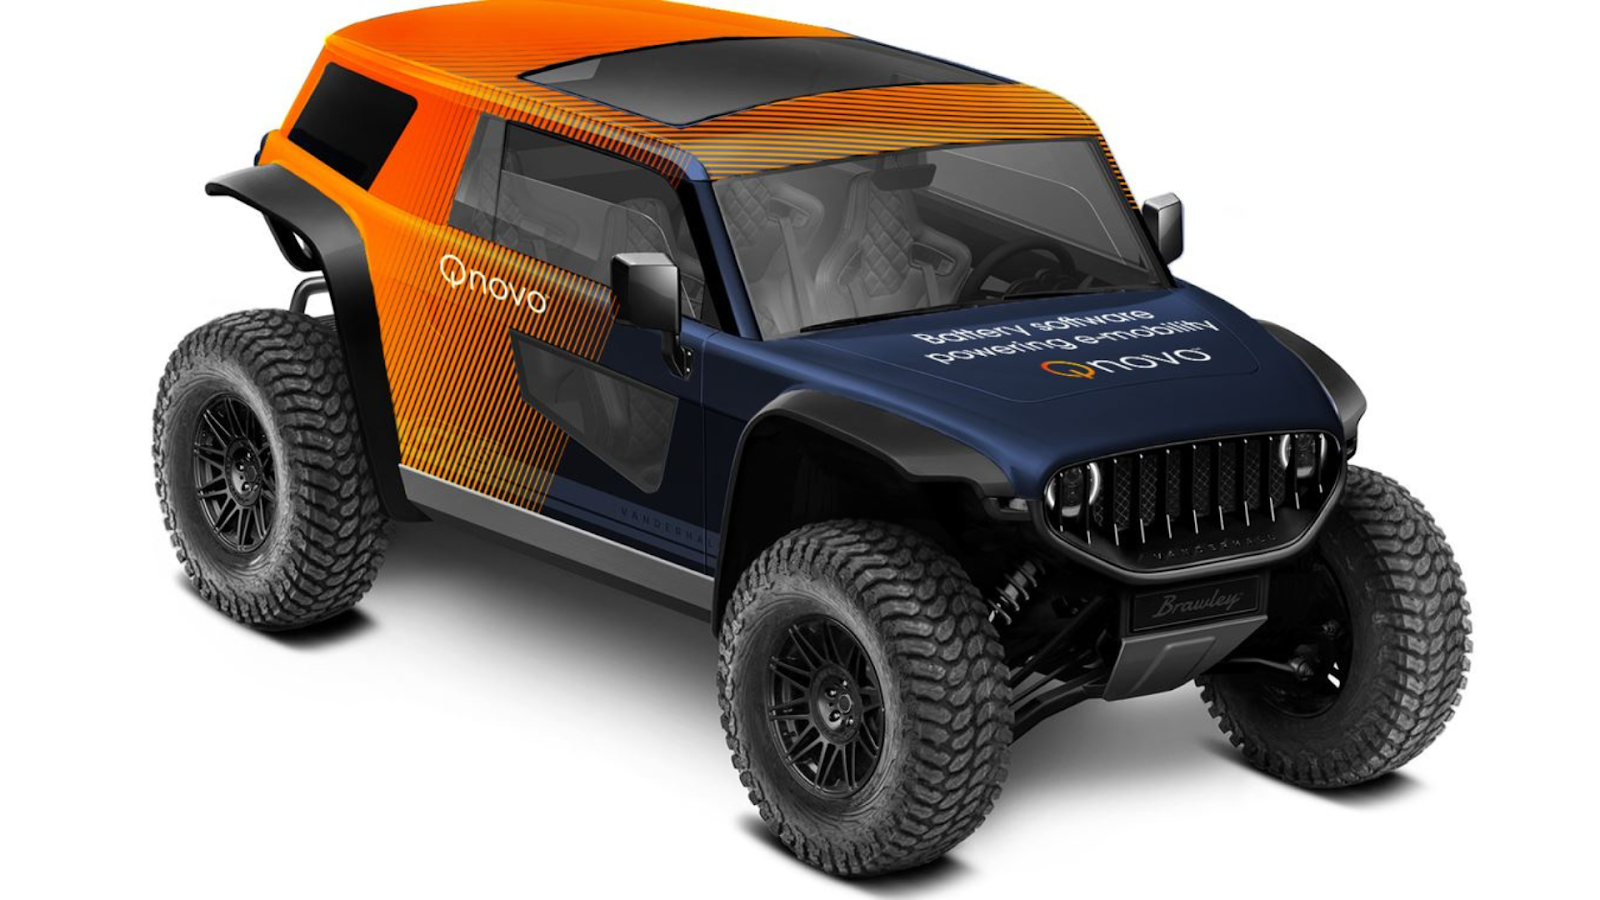 Qnovo debuted its Vanderhall Motor Works partnership at CES 2023 with this light electric vehicle. Image used courtesy of Qnovo